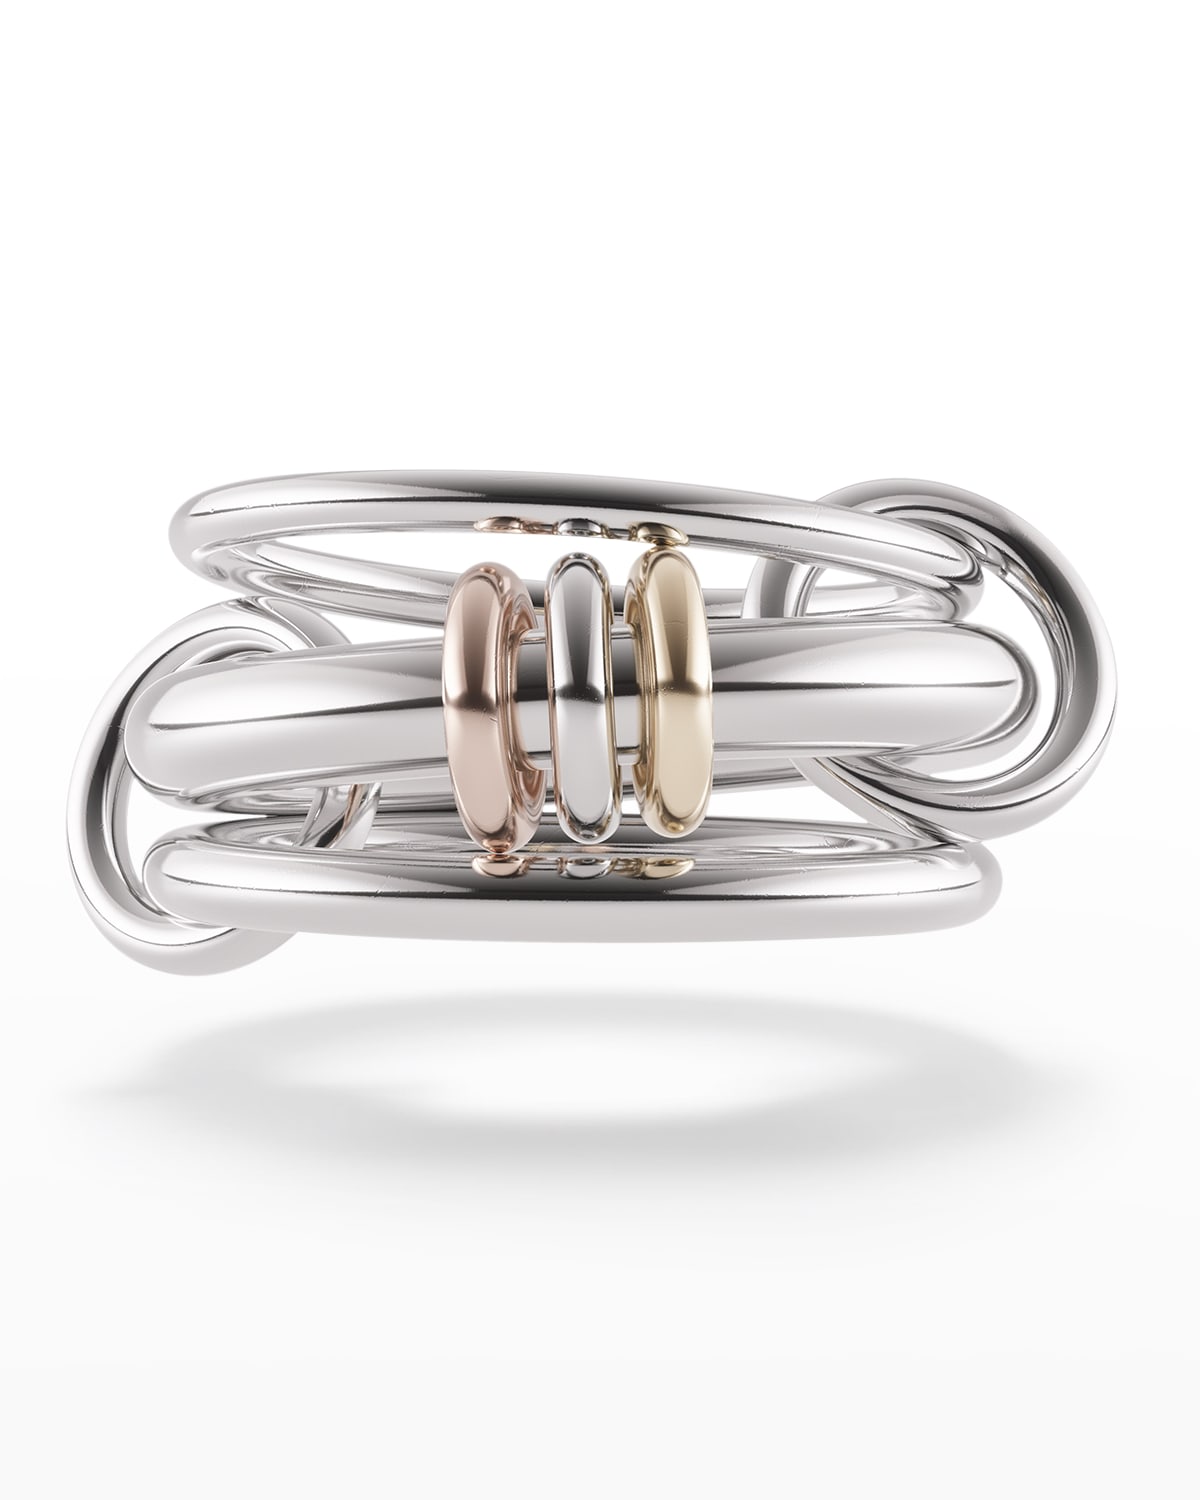 SPINELLI KILCOLLIN GEMINI 3-LINK RING WITH METAL ACCENTS